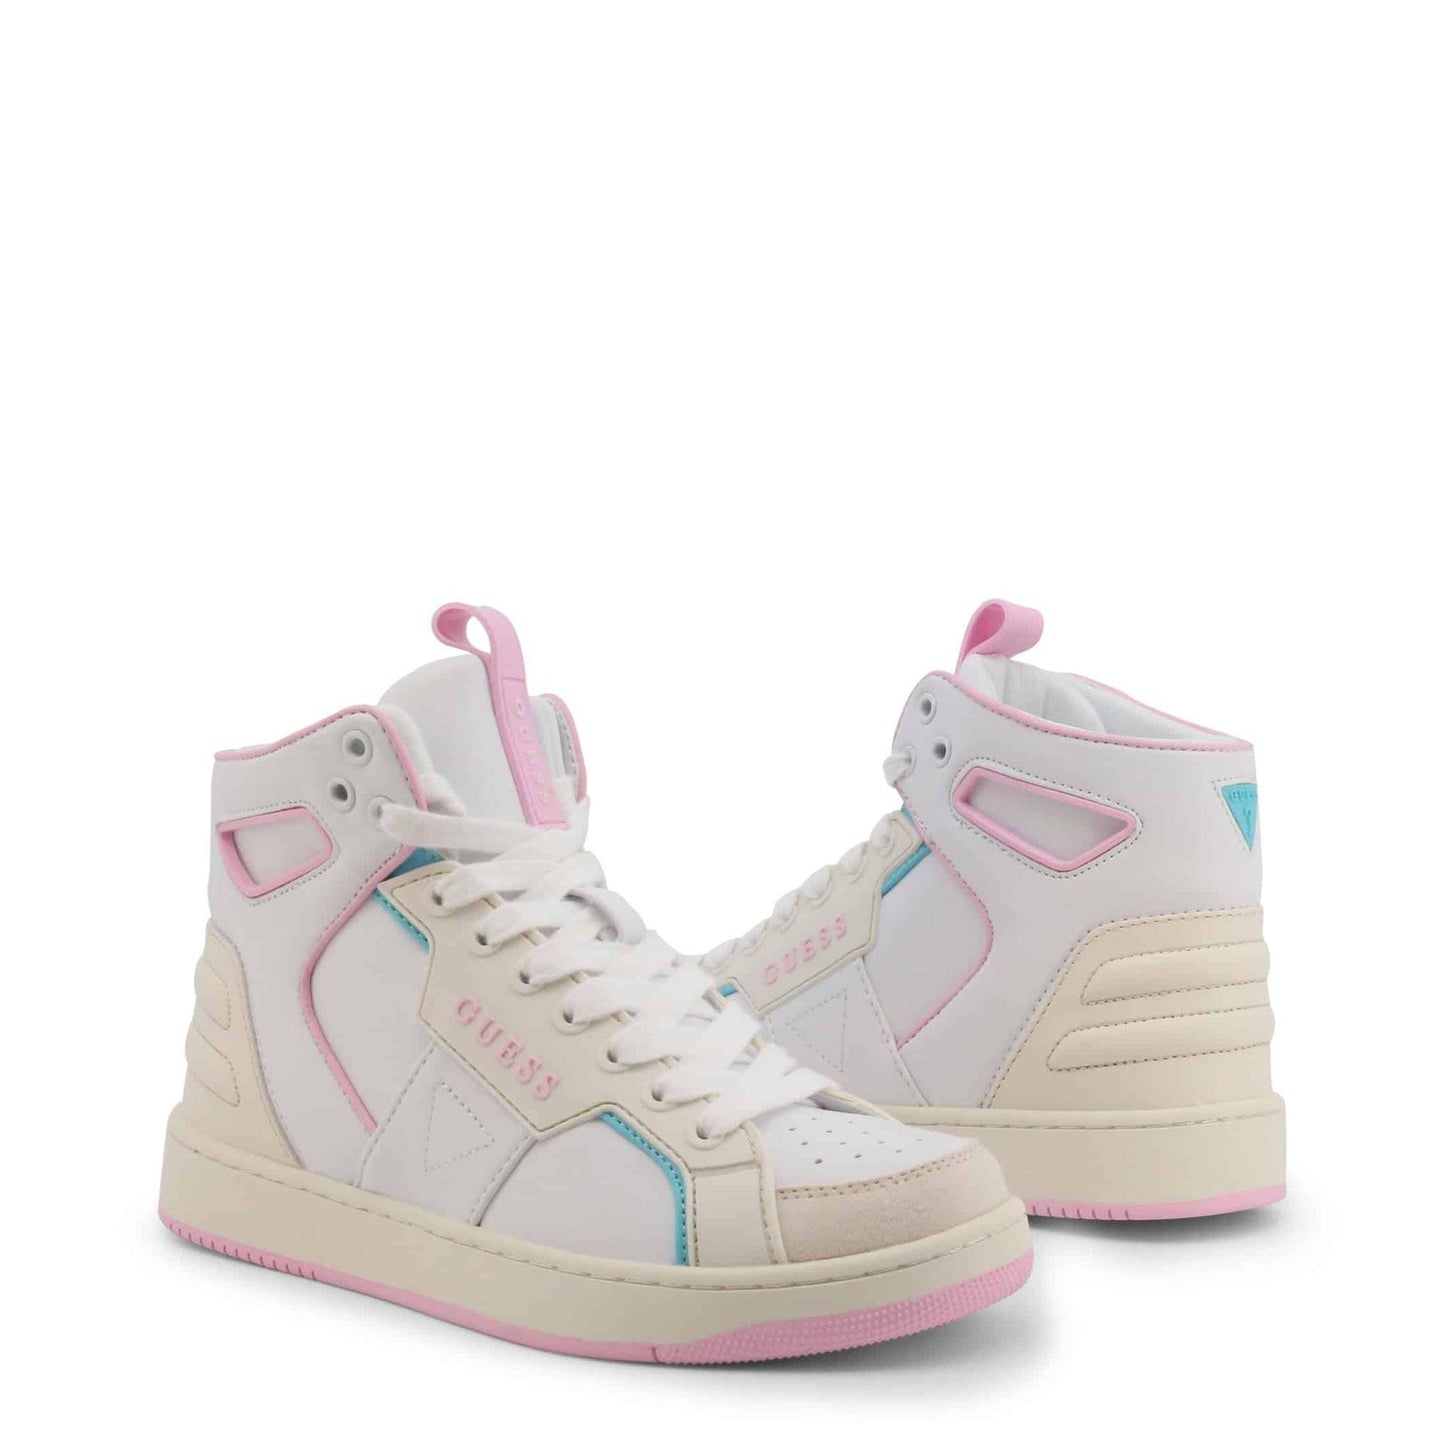 Women Sneakers - Guess Sneakers Shoes - Trainers - Sneakers - Guocali